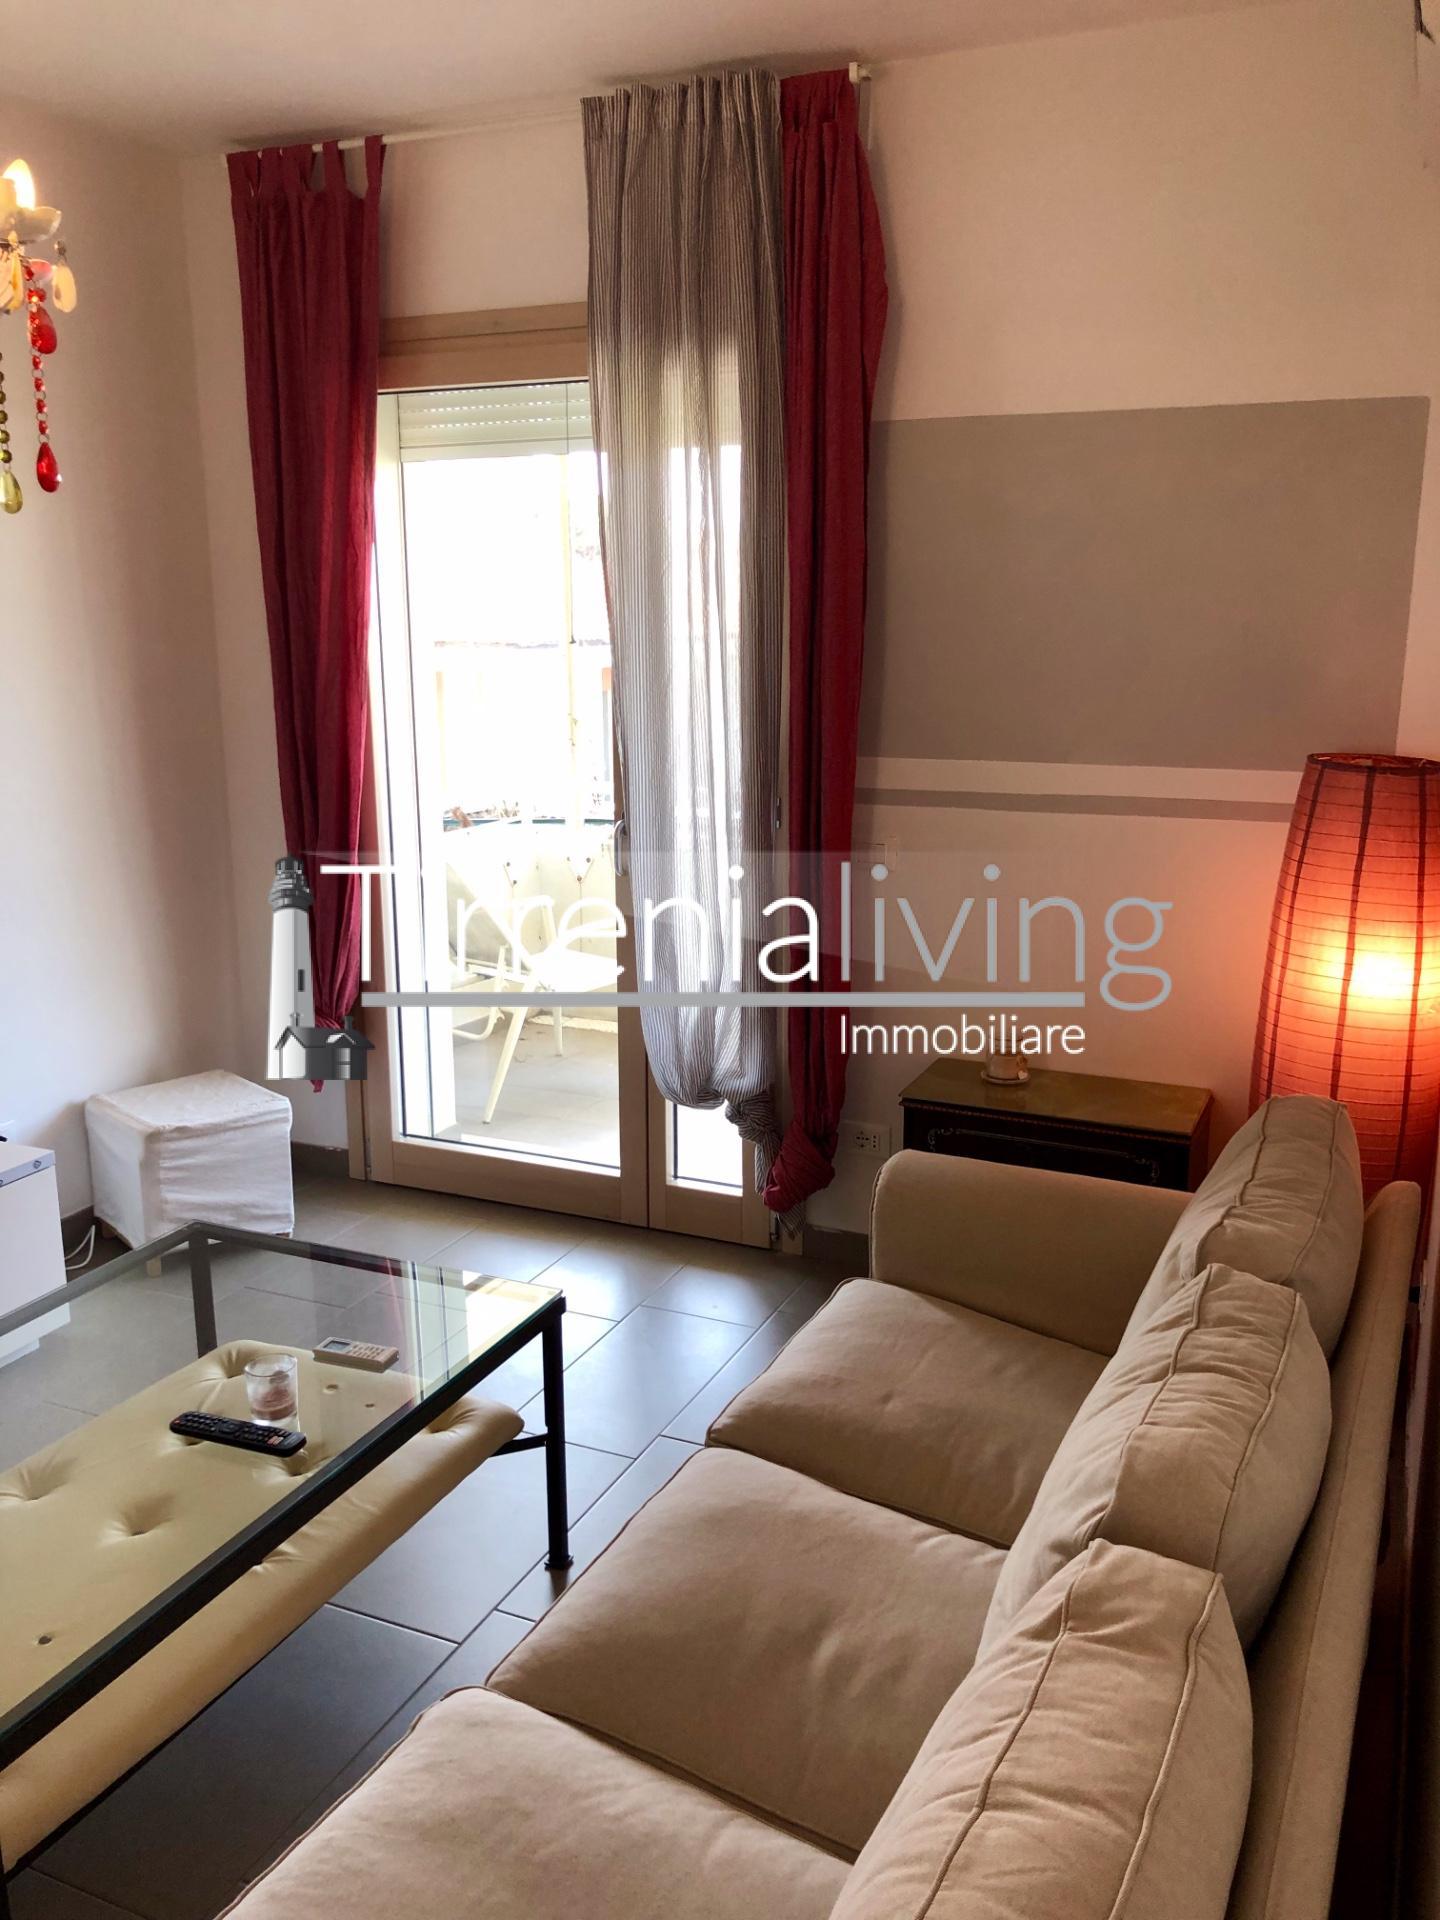 Apartment for rent, ref. A-463-A